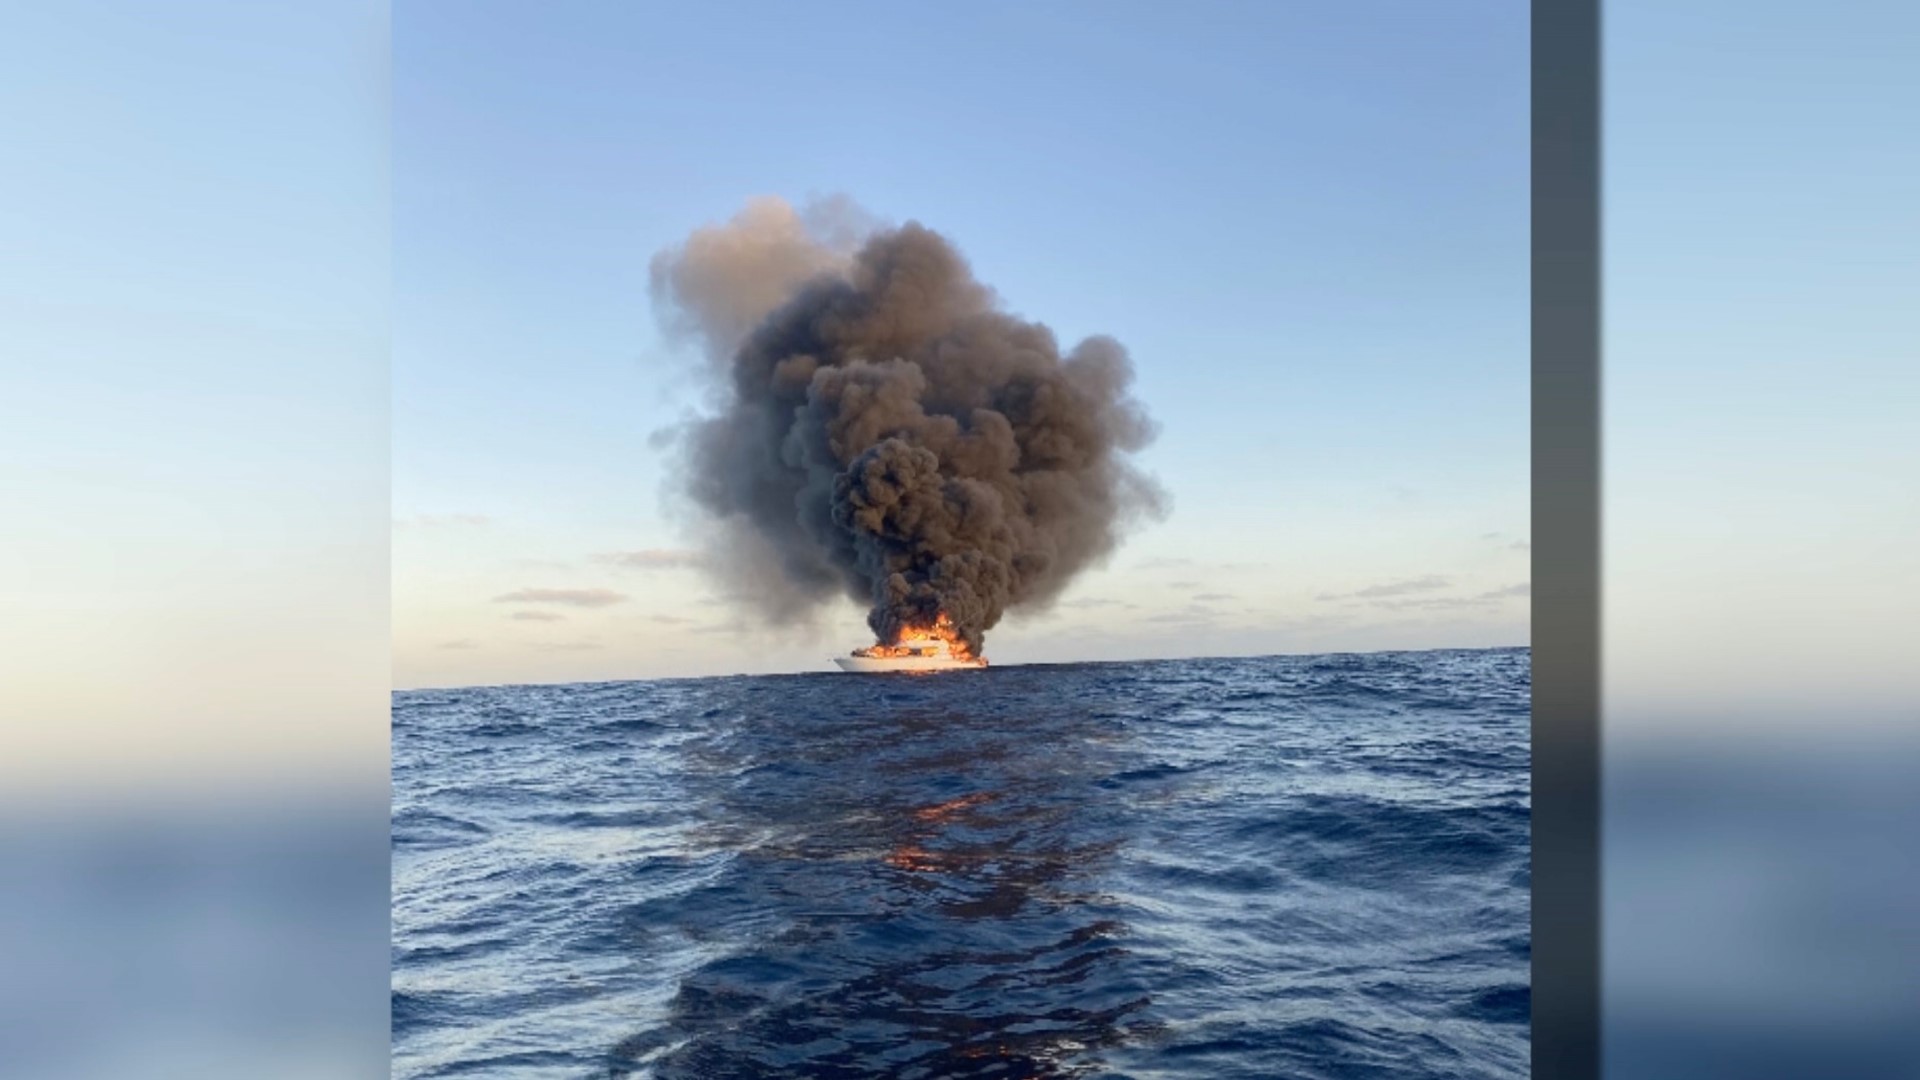 Half the boat was engulfed in flames five minutes later, and they couldn’t access the life raft or dingy, so the three men scrambled off the boat onto a kayak.